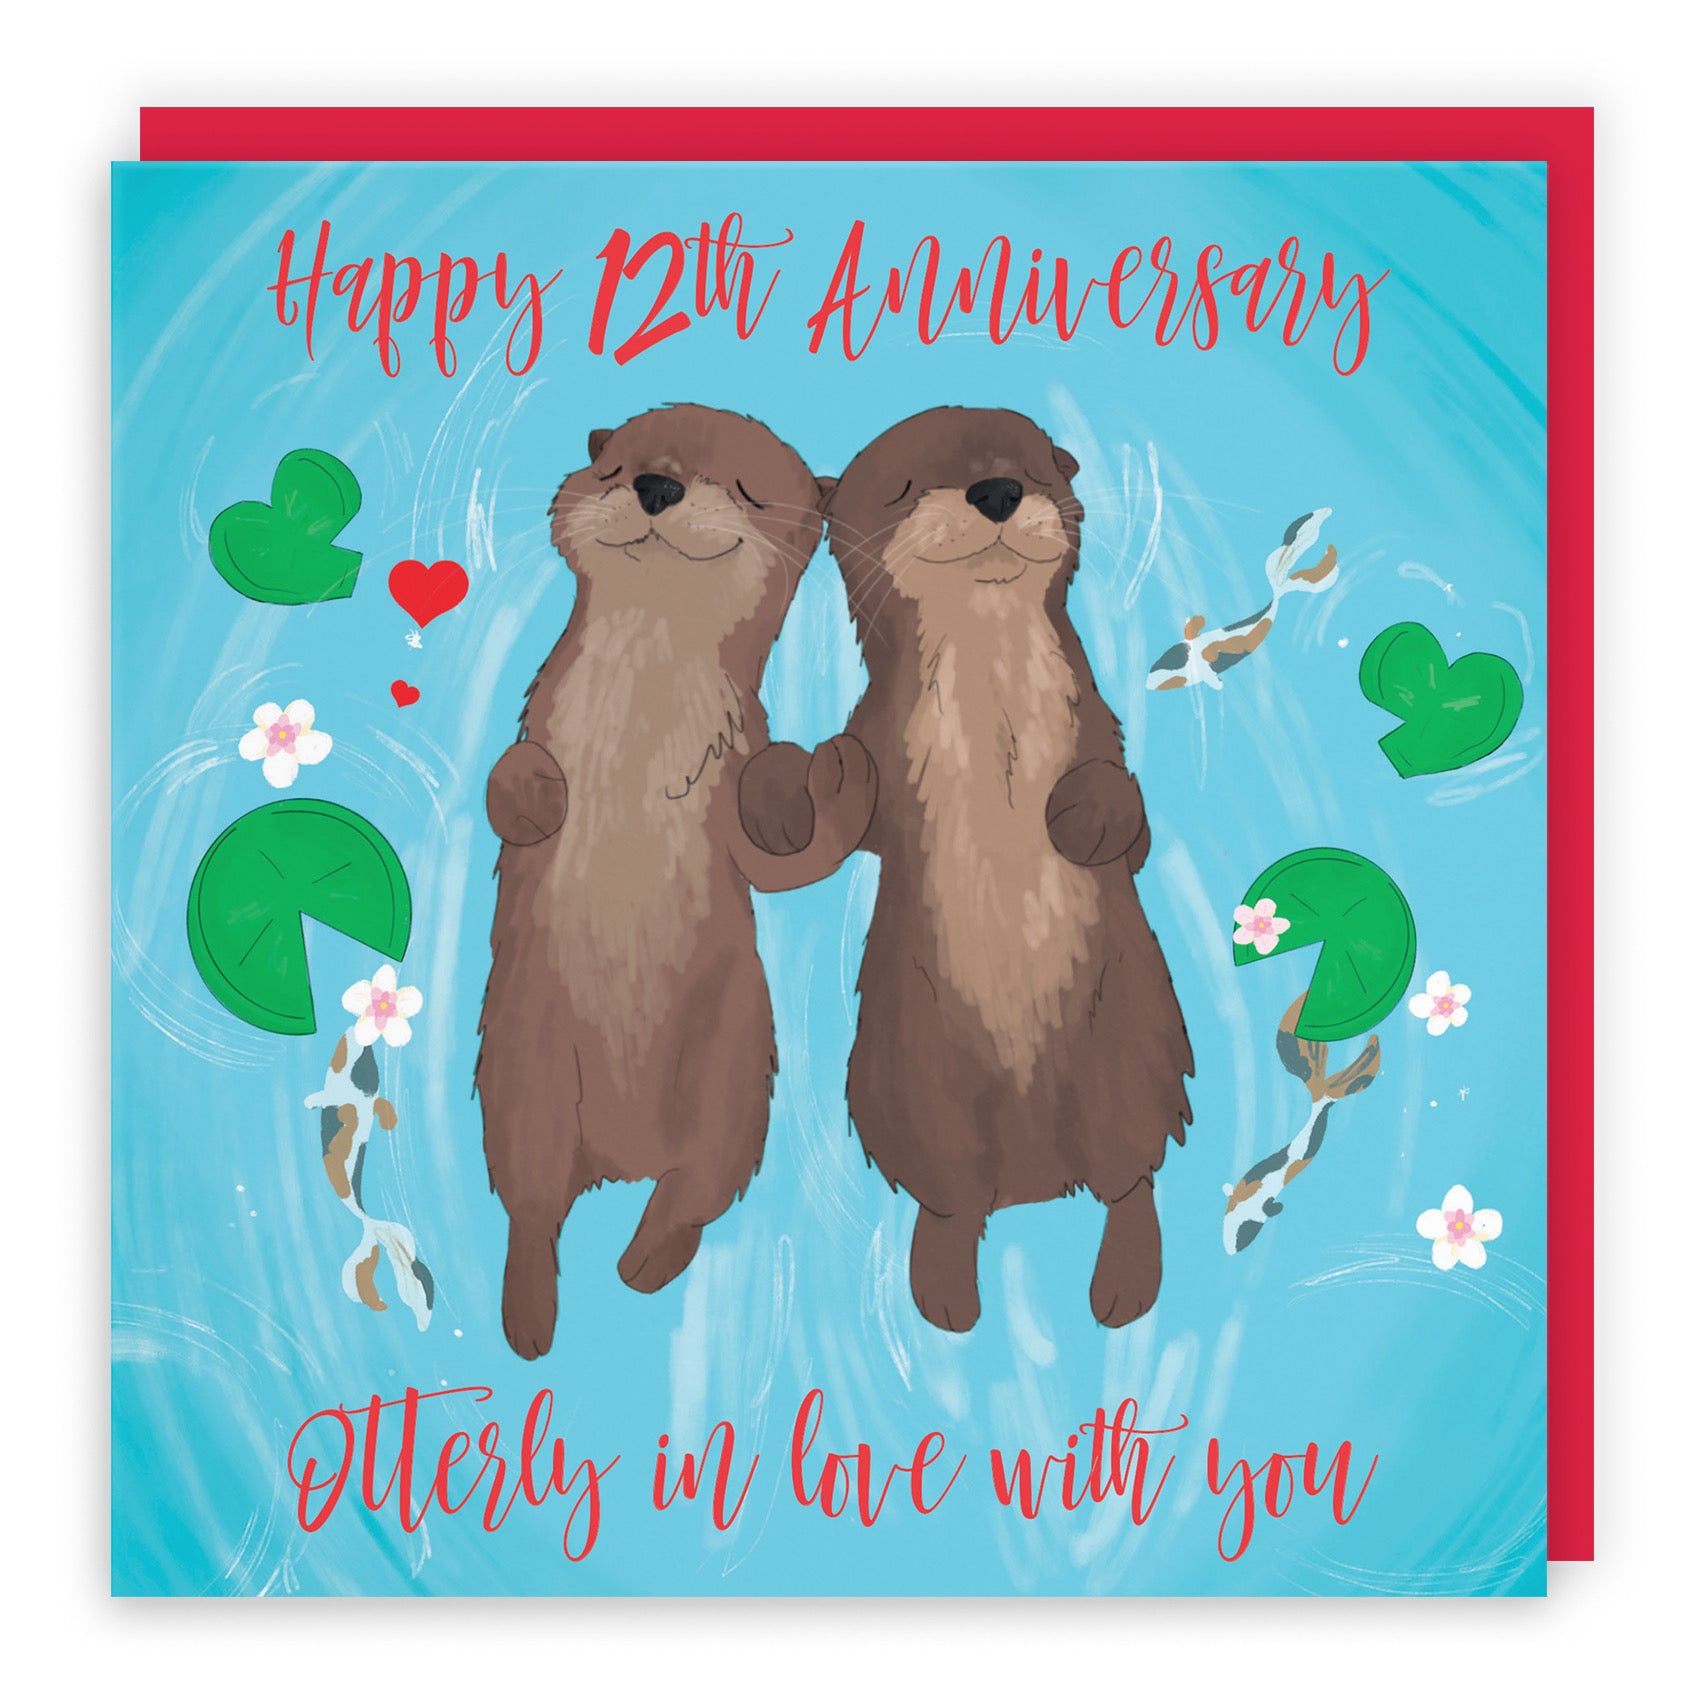 Otters 12th Anniversary Card Cute Animals - Default Title (B0B51YPY4W)